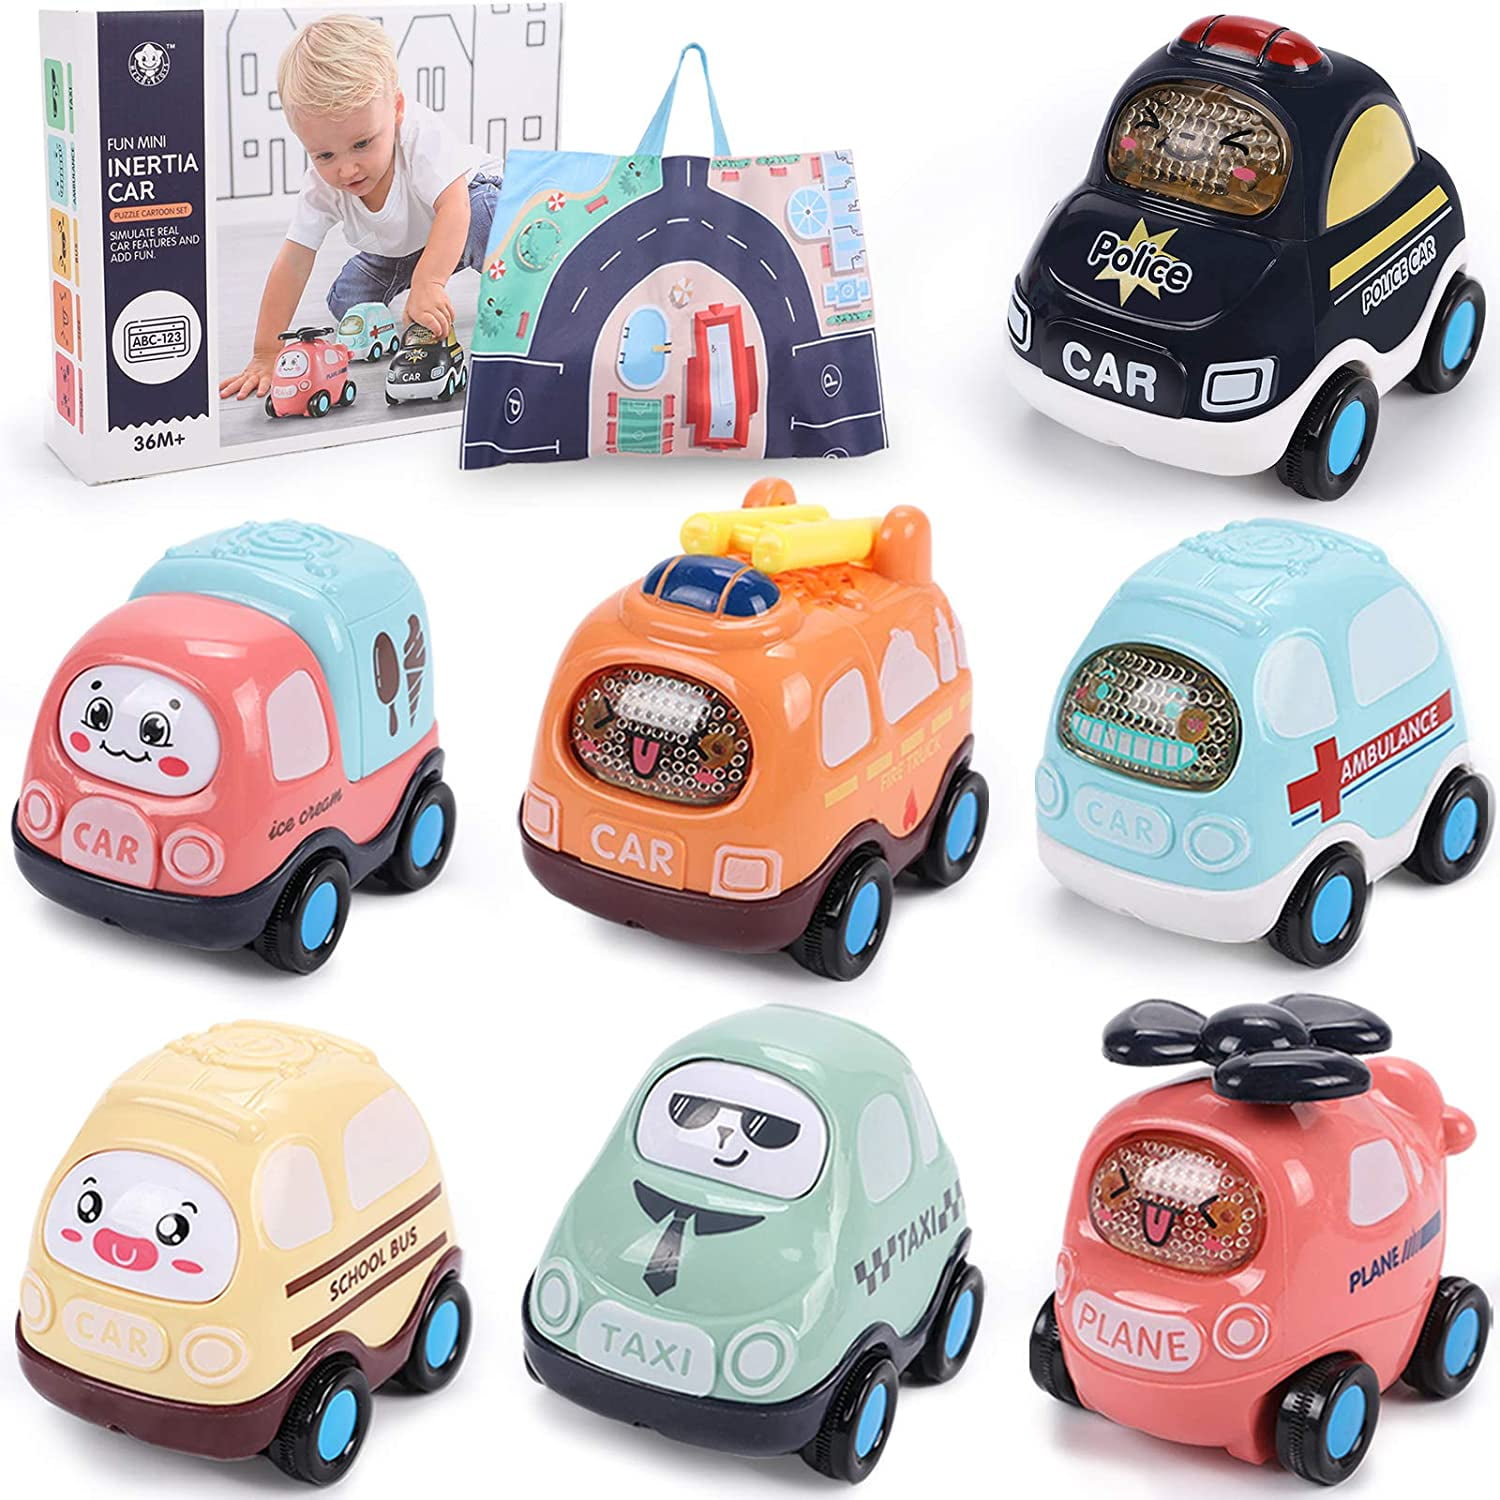 Baby Toy Cars 7 Set Push and Go Vehicles Friction Powered Cars Toy Early Educational Toys and Birthday Gift for 1 2 3 Years Old Boys Girls f015195b 2cd1 4c51 96b3 0371ac0c734e.d2dd163453cf259e2bdb0cdaa2152004